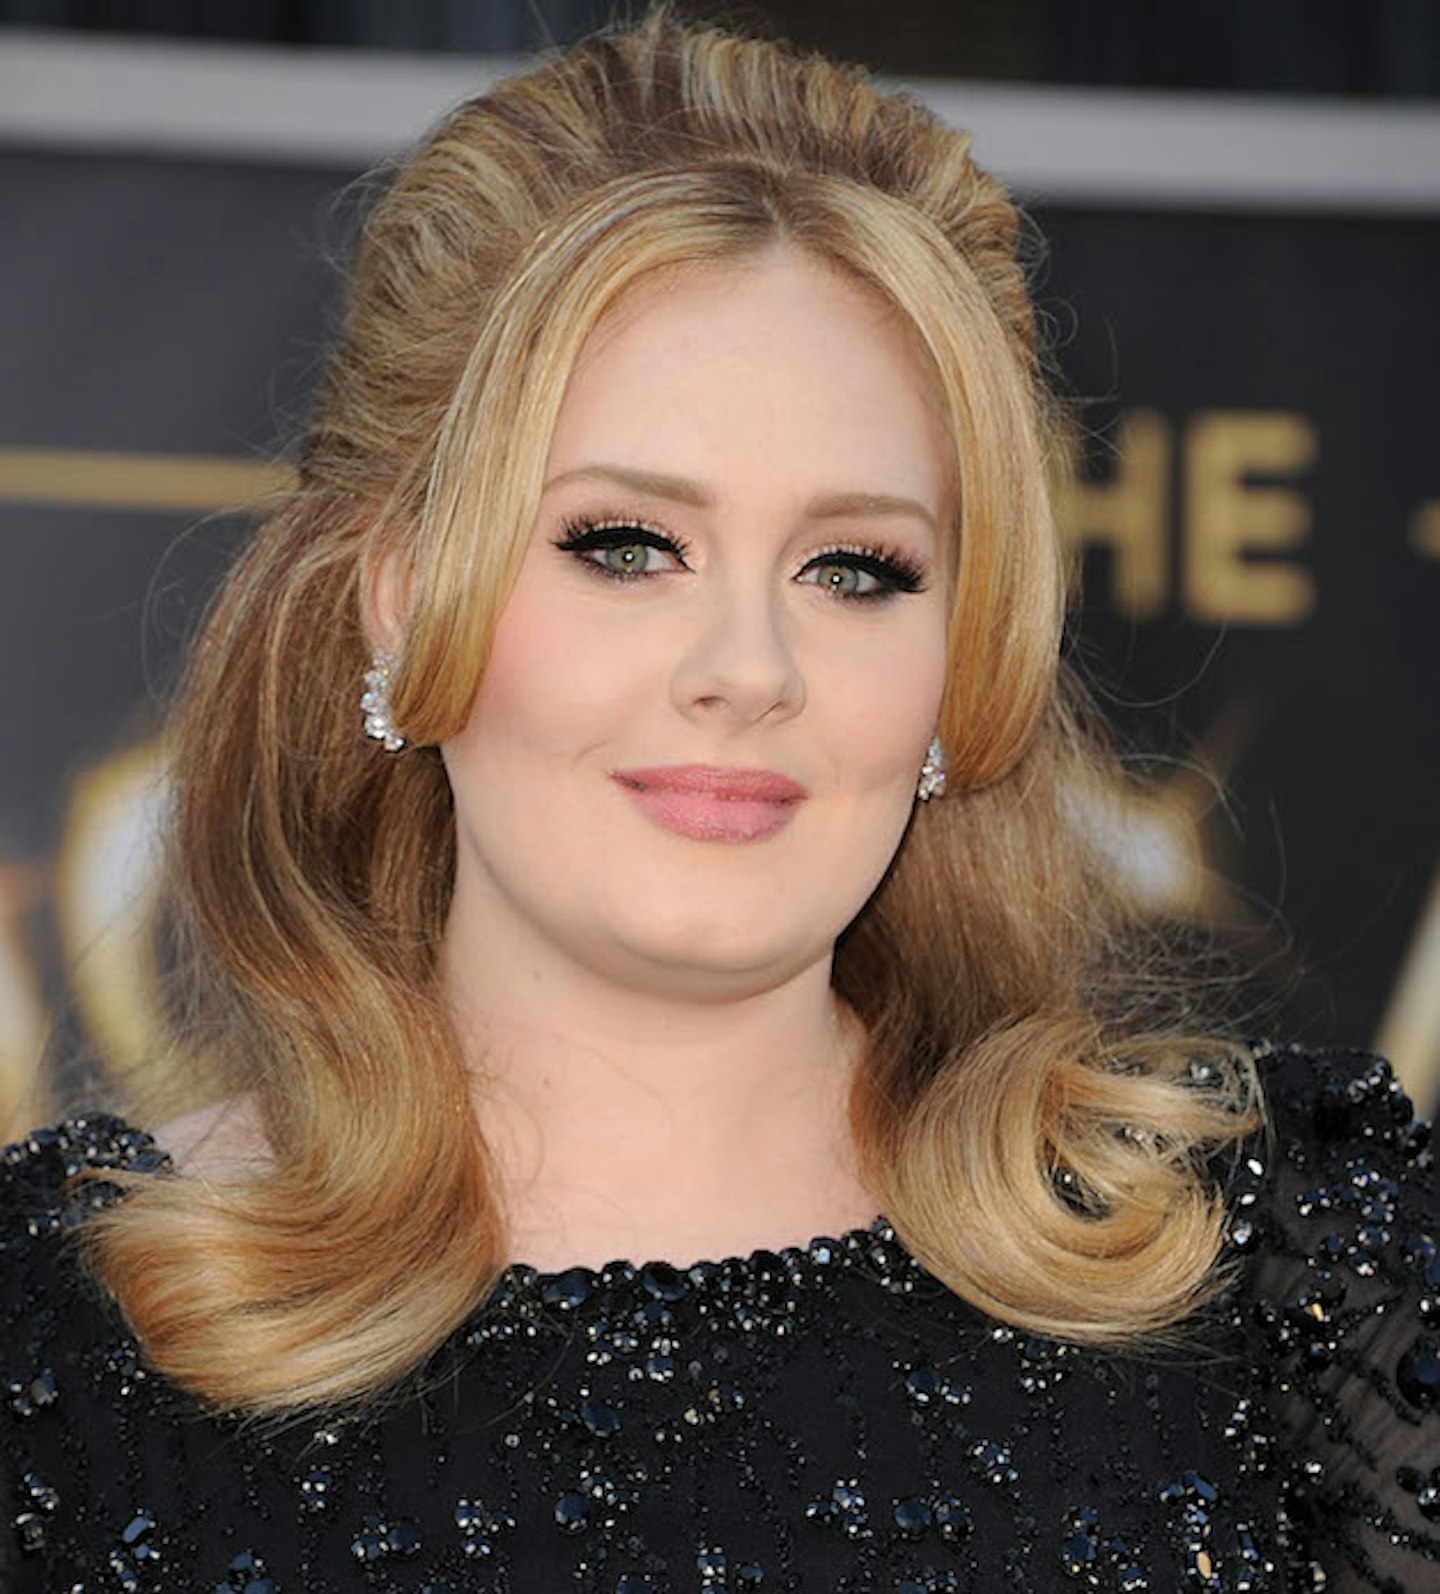 Ditching sugar helped Adele trim down her figure 